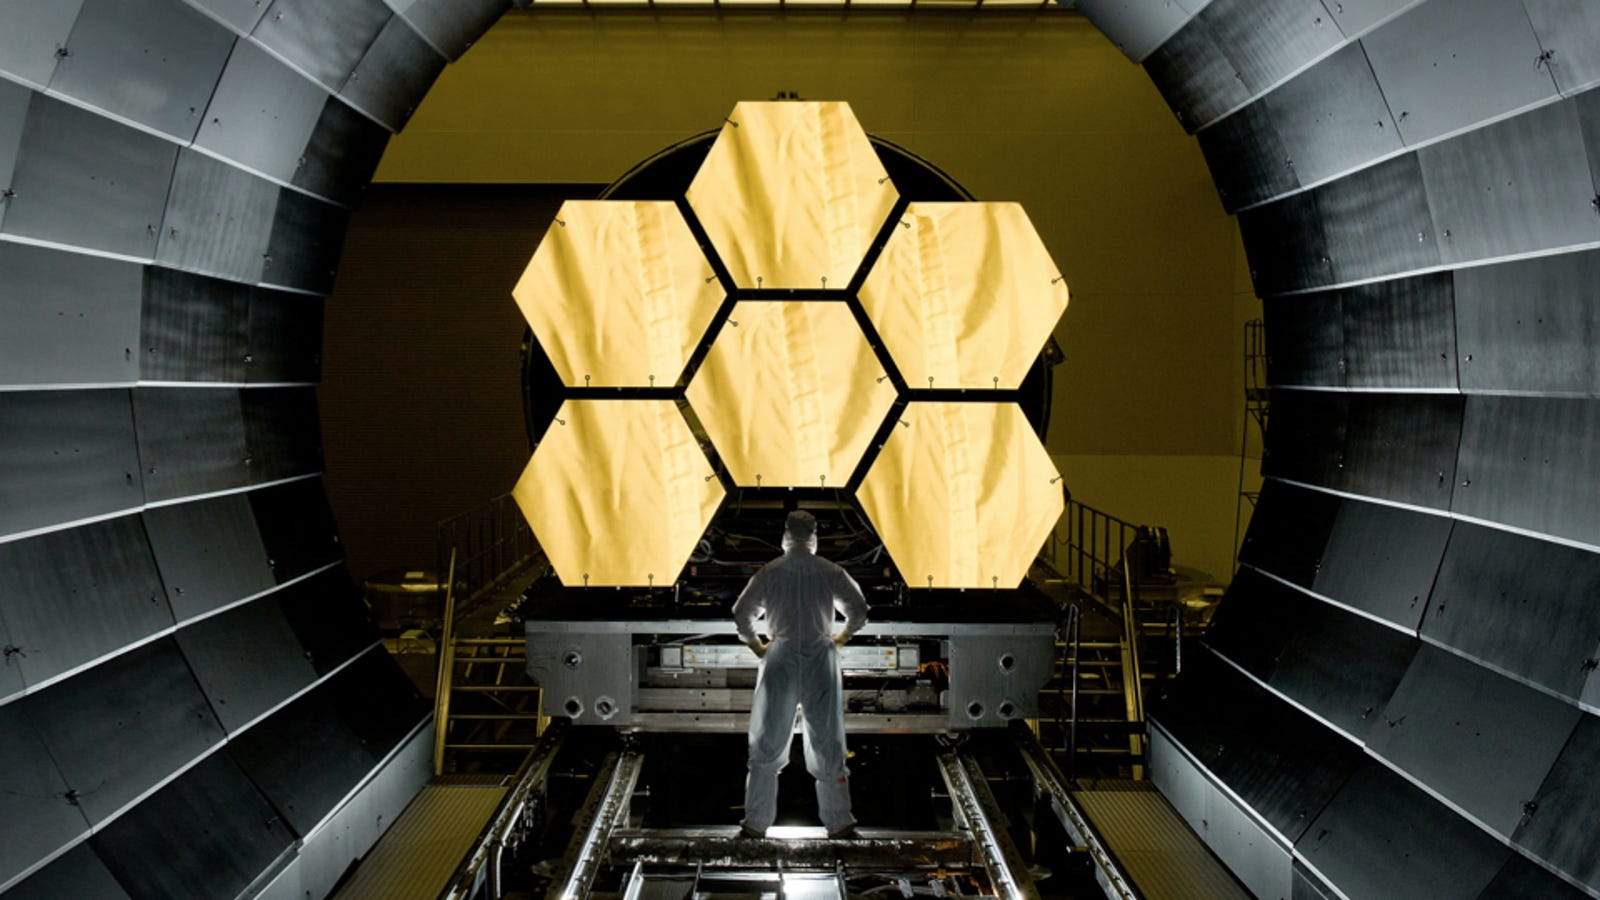 Watch the assembly of the James Webb Space Telescope — live via Webb cam!